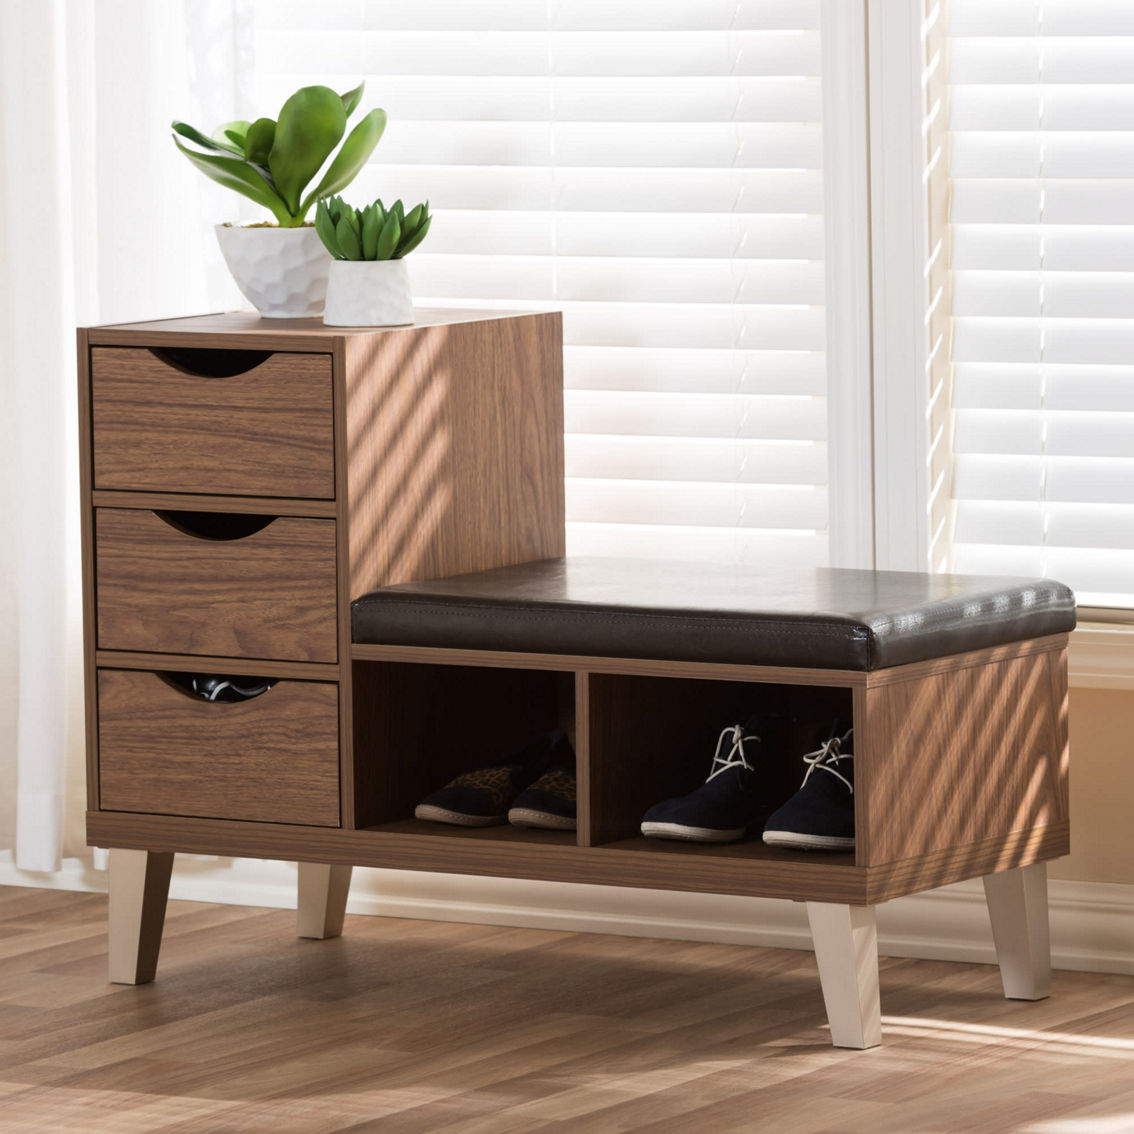 Baxton Studio Arielle Walnut Wood 3-Drawer Shoe Storage With Faux Leather Bench - Image 5 of 5